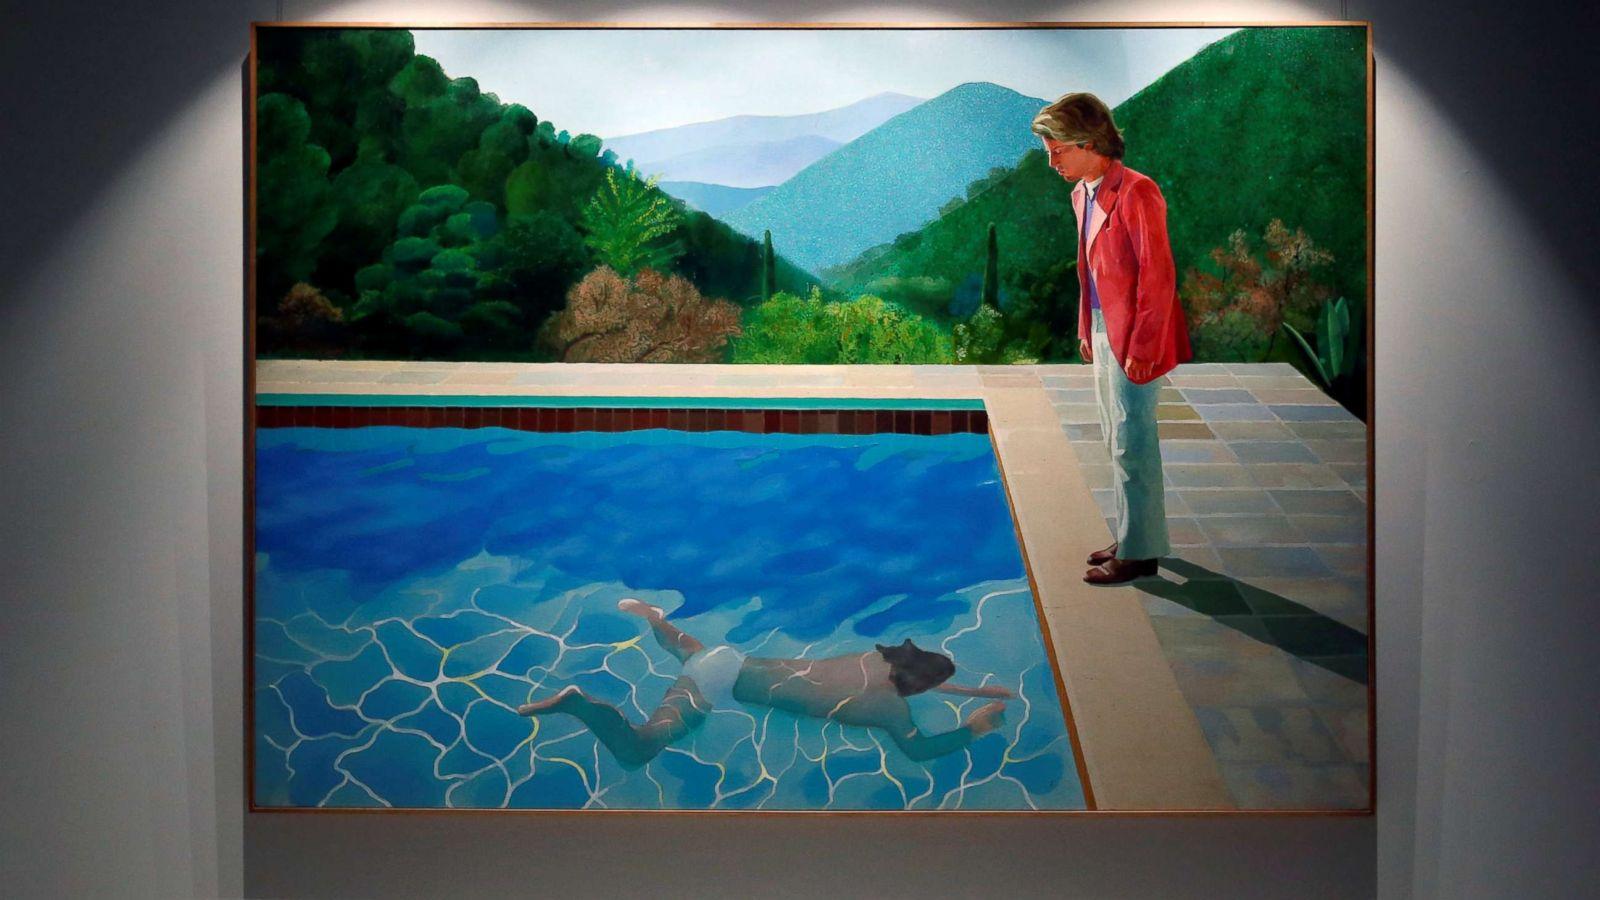 David Hockney's 'Portrait of an Artist Pool with Two Figures